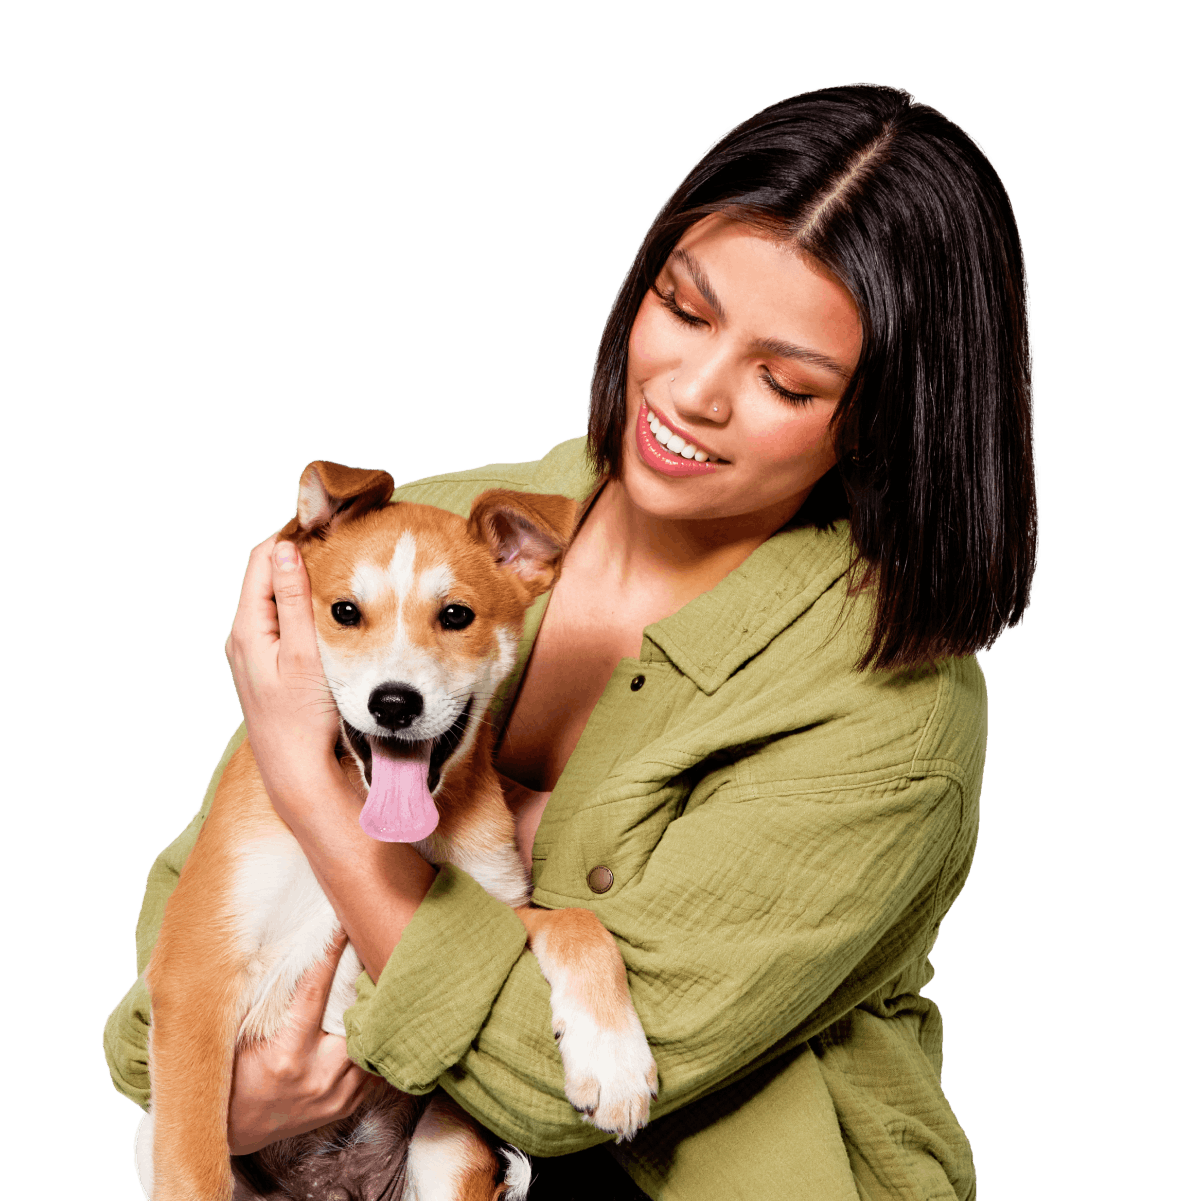 Woman smiling and holding a cute red and white puppy